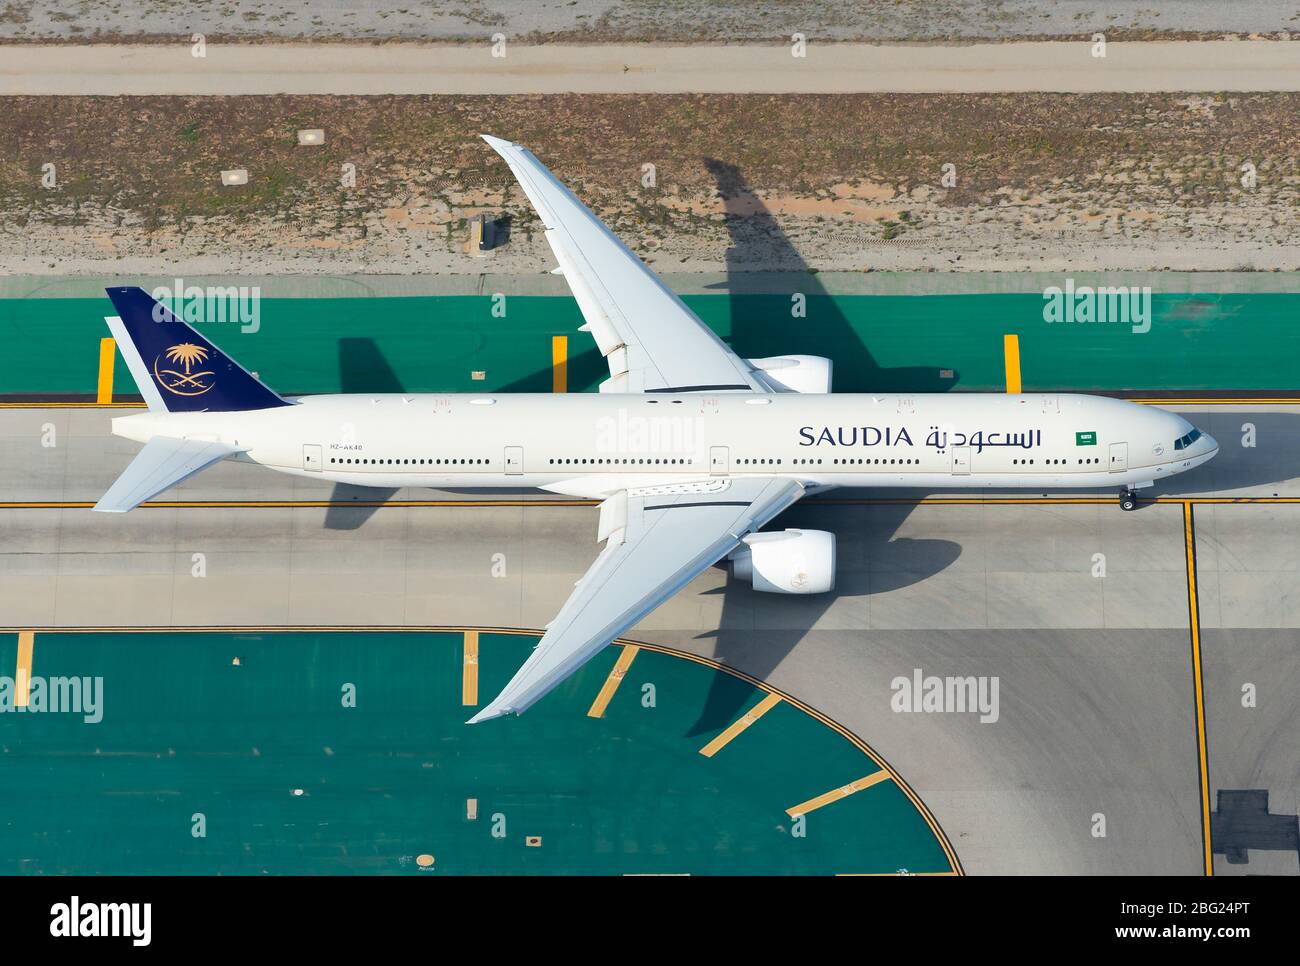 Saudia Airlines Boeing 777 taxiing at Los Angeles International Airport. Boeing 777-300 airplane HZ-AK40 aerial view. Saudi Arabian Airlines. Stock Photo